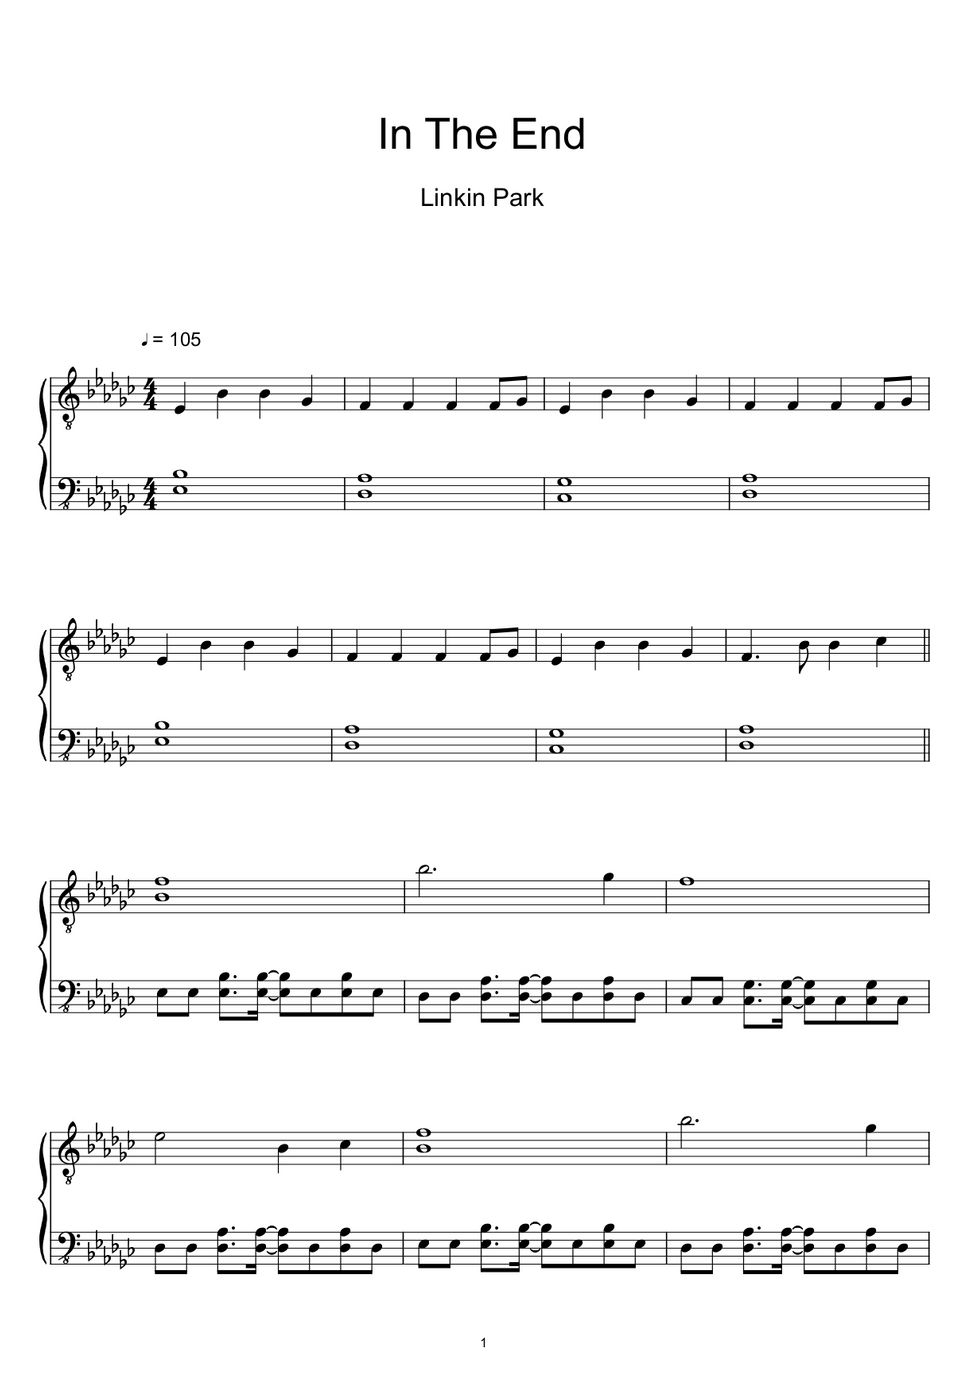 Linkin Park - In the End (Sheet Music, MIDI,) by sayu